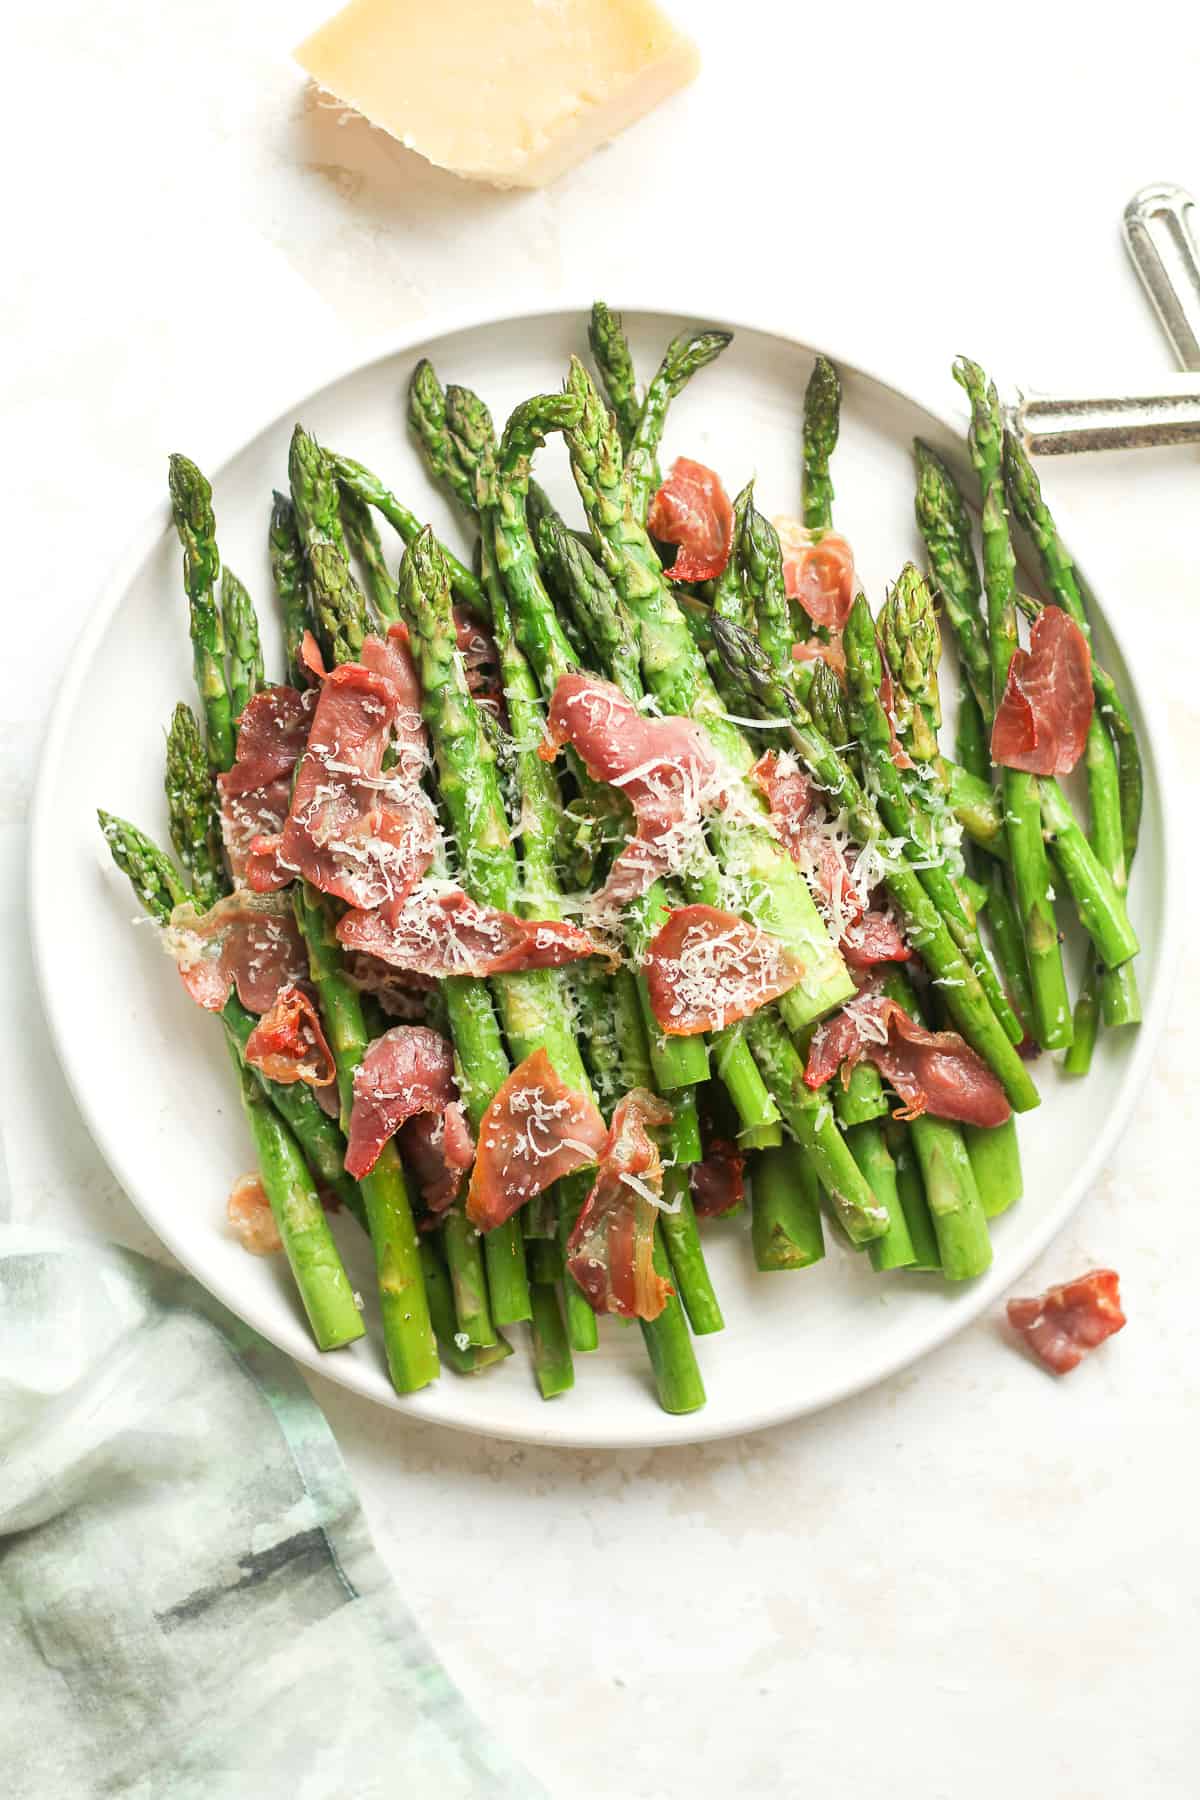 Roasted Asparagus with Prosciutto and Parmesan